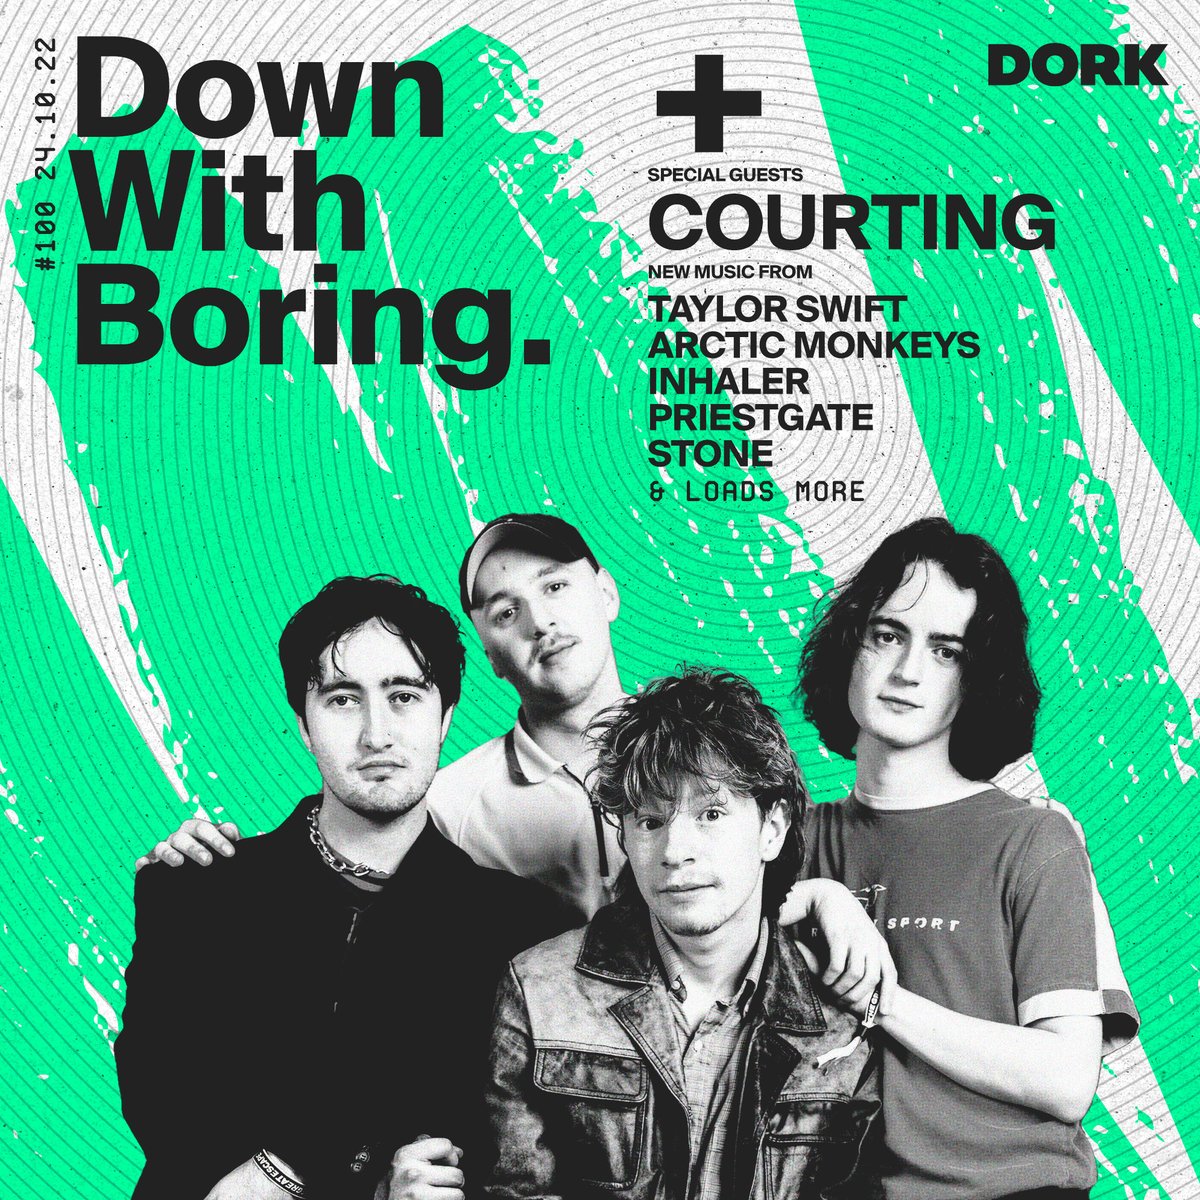 For tonight's 100th episode of Down With Boring, we'll be joined by @courtingband, dive into @taylorswift13's new album 'Midnights', and play the best new tracks from the likes of @STONELIVERPOOL, @InhalerDublin and more. 8pm Dork Radio. Podcast after. readdork.com/news/down-with…